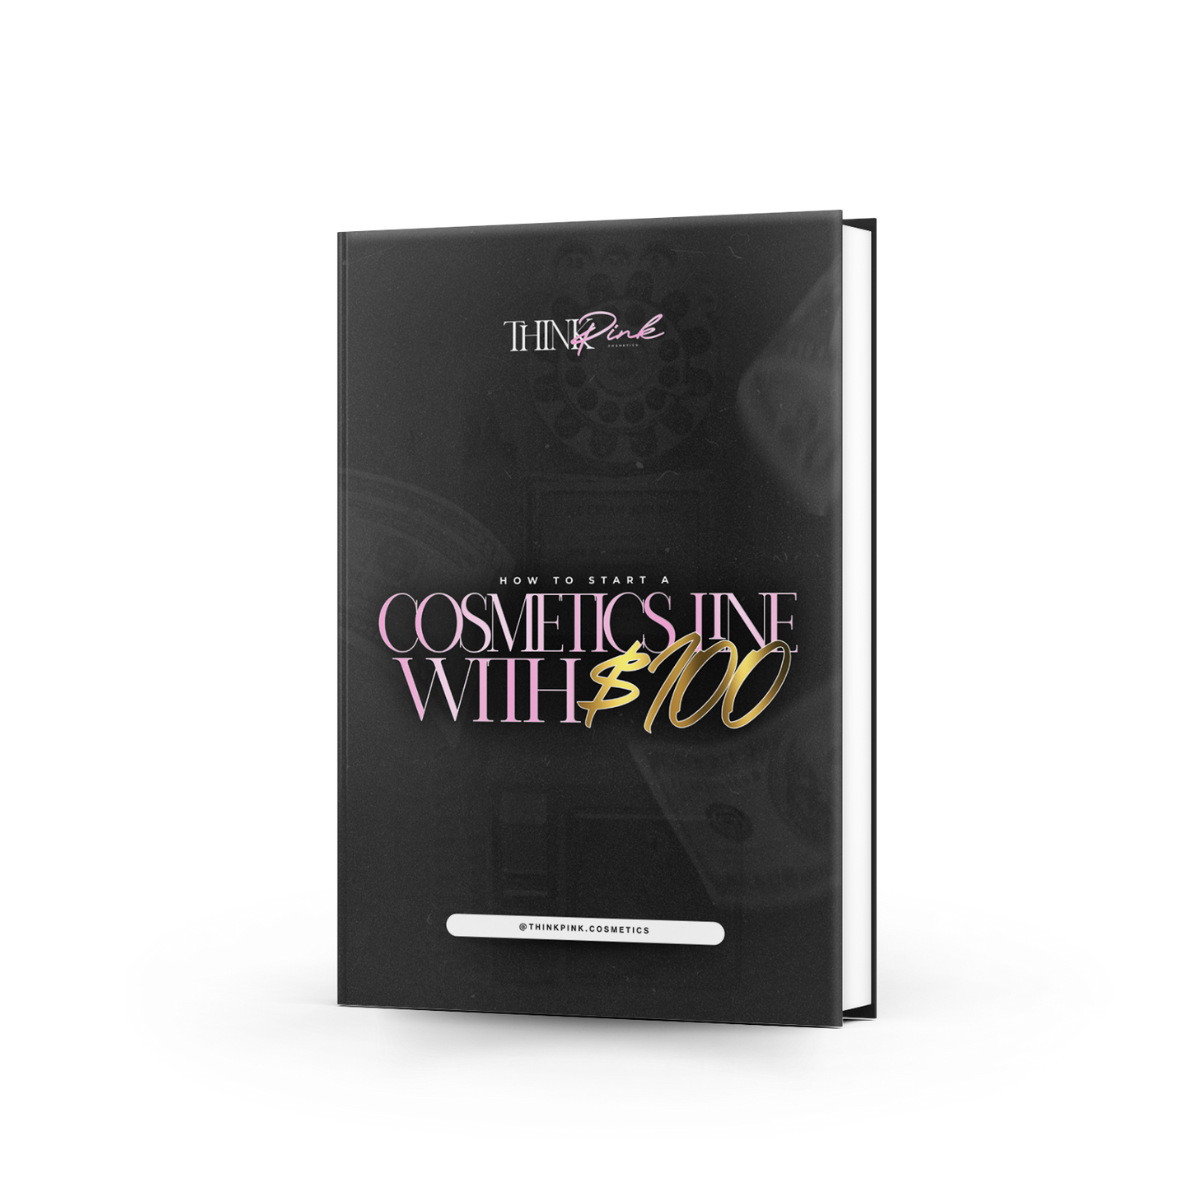 How To Start A Cosmetic Line With $100 E-BOOK